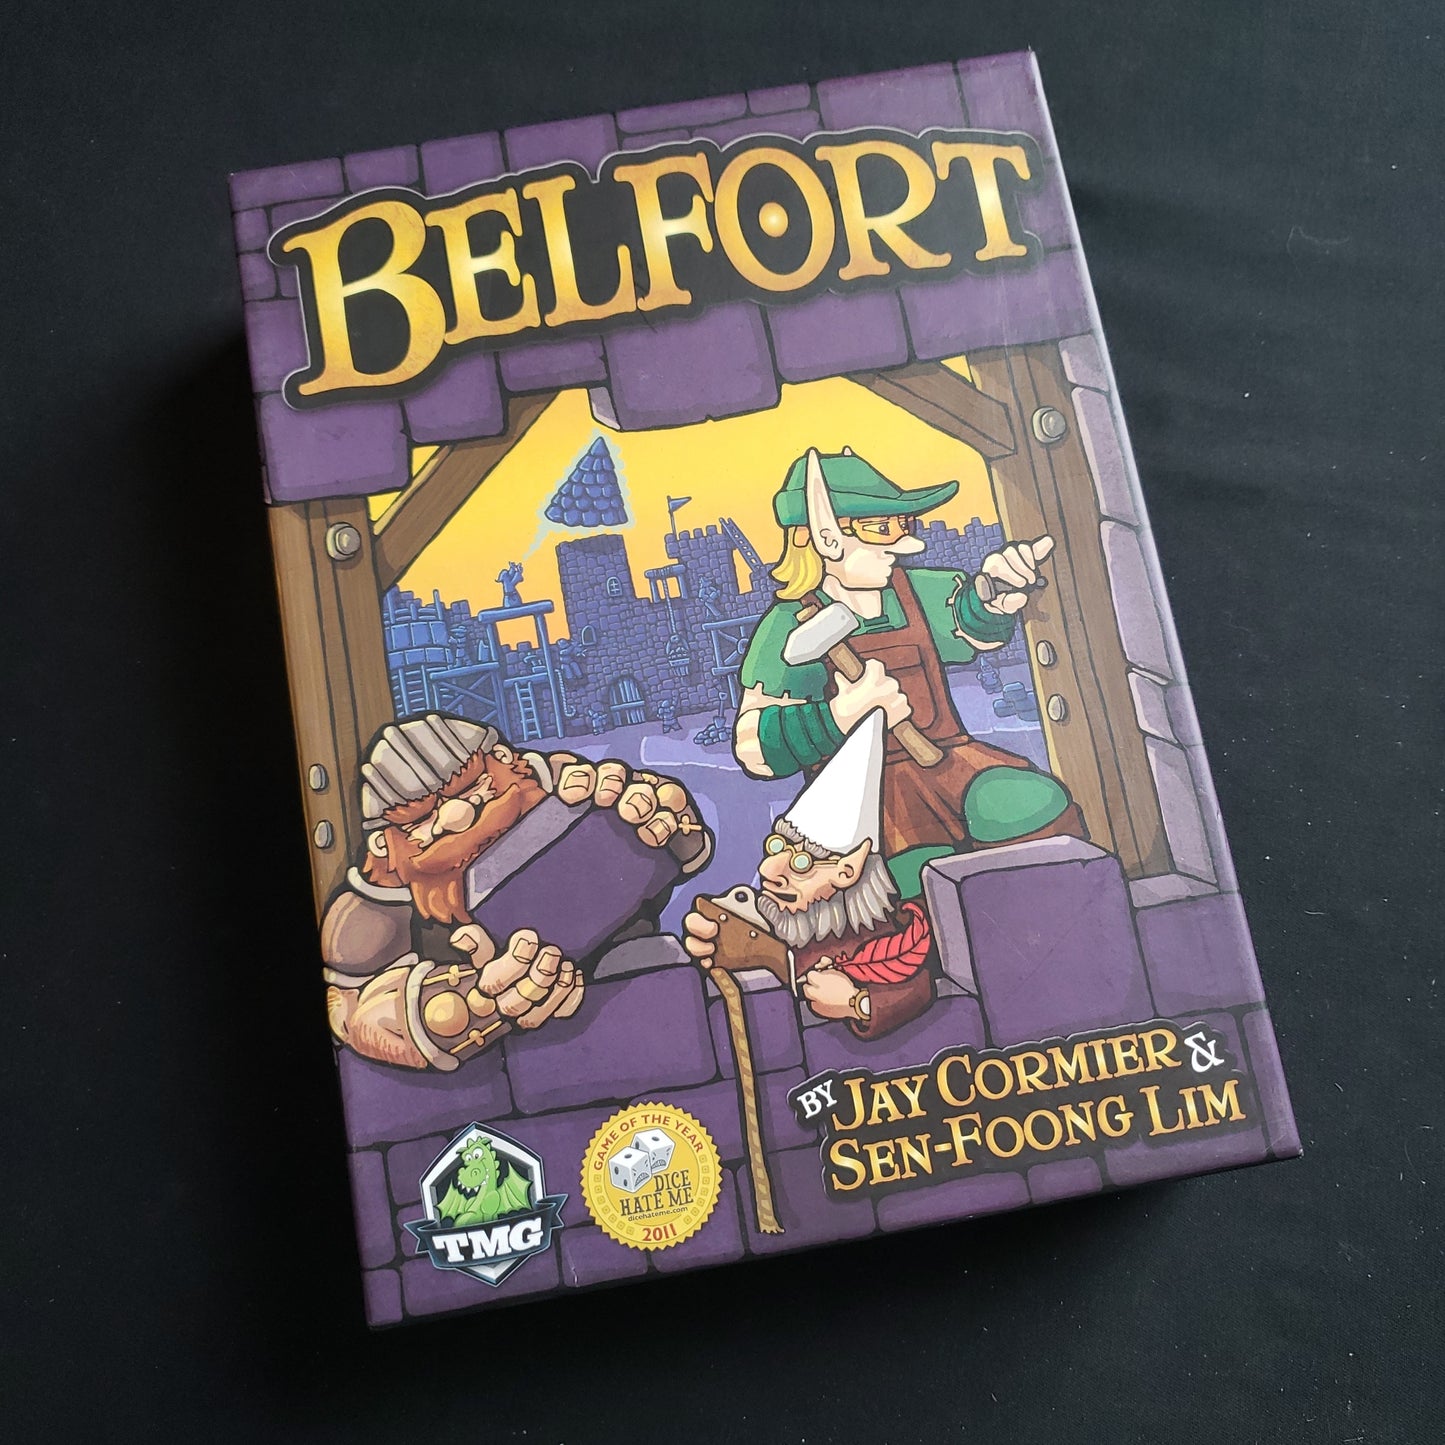 Image shows the front cover of the box of the Belfort board game